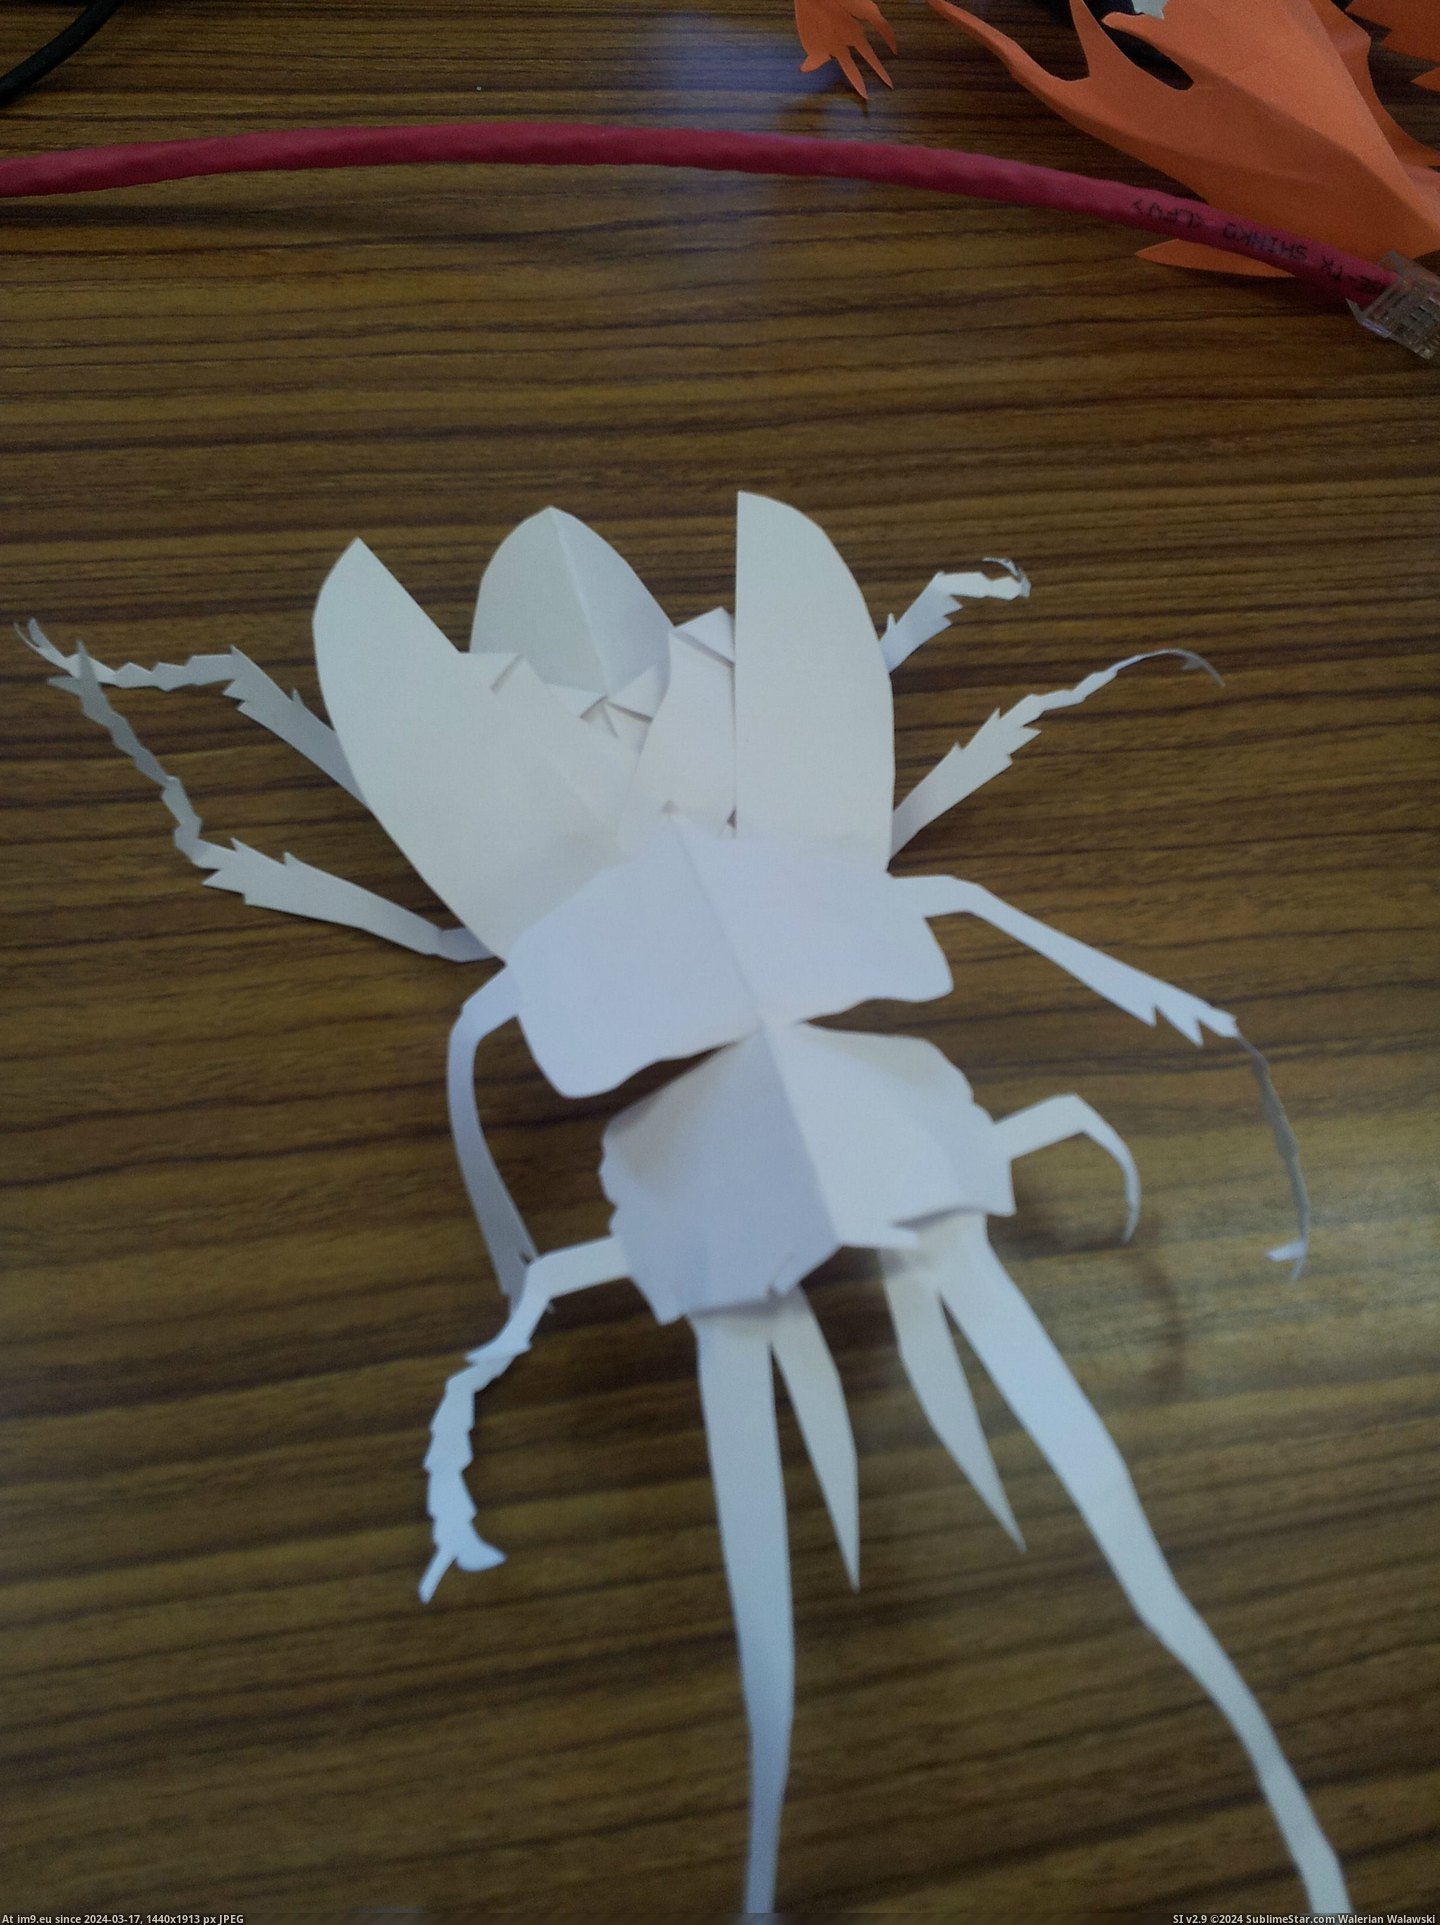 #One #Paper #Students #Creatures #Freehand #Bored #Completely [Pics] One of my students makes these creatures out of paper completely freehand whenever he is bored 9 Pic. (Obraz z album My r/PICS favs))